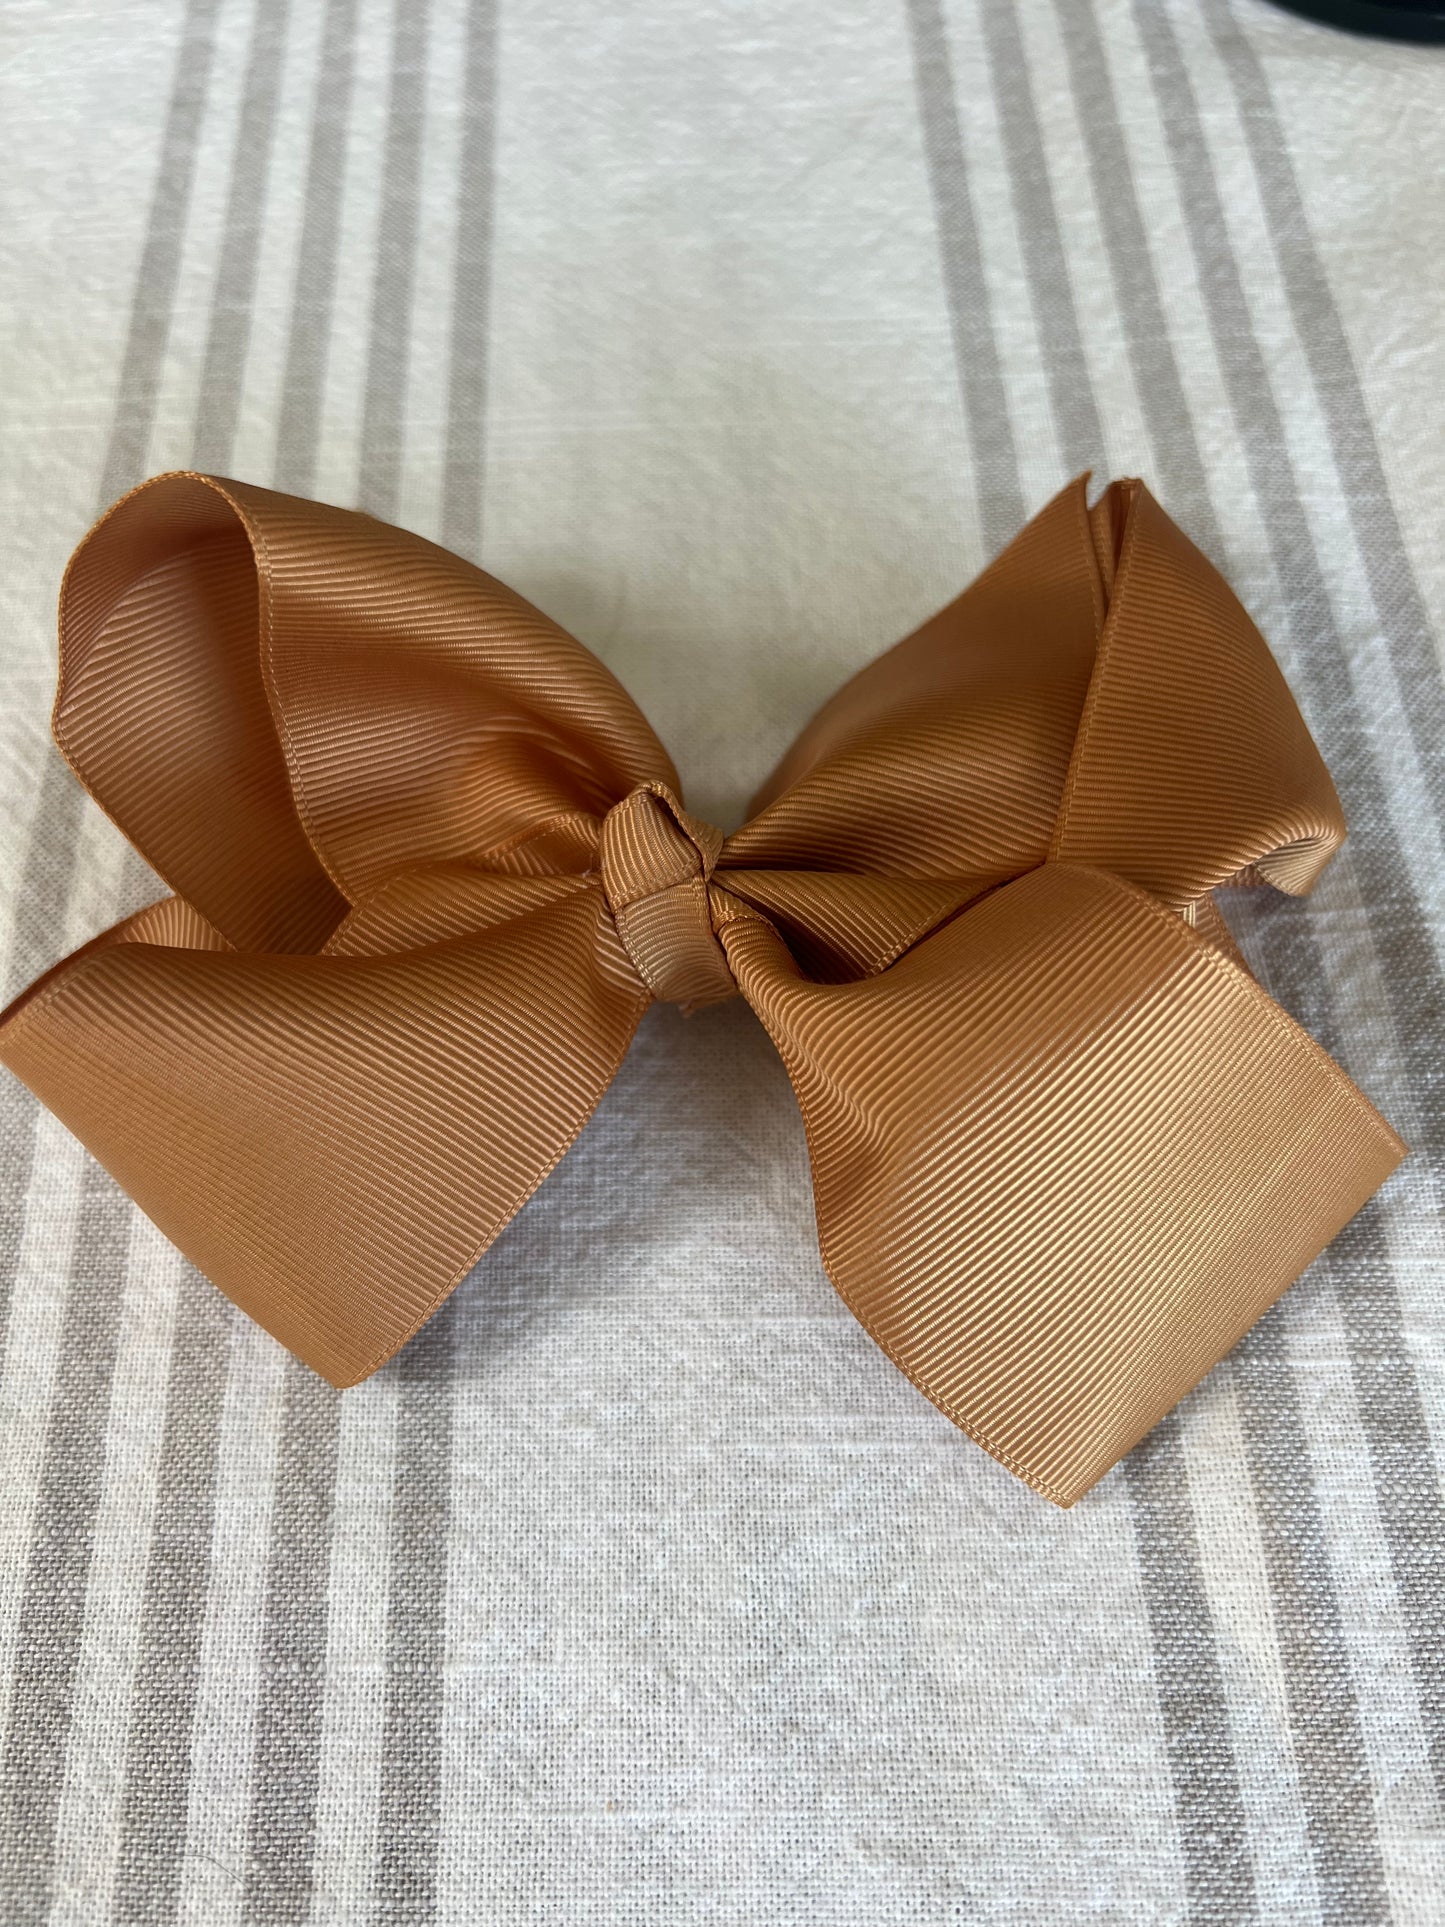 Black, White, and Gold Game Day Bow Collection